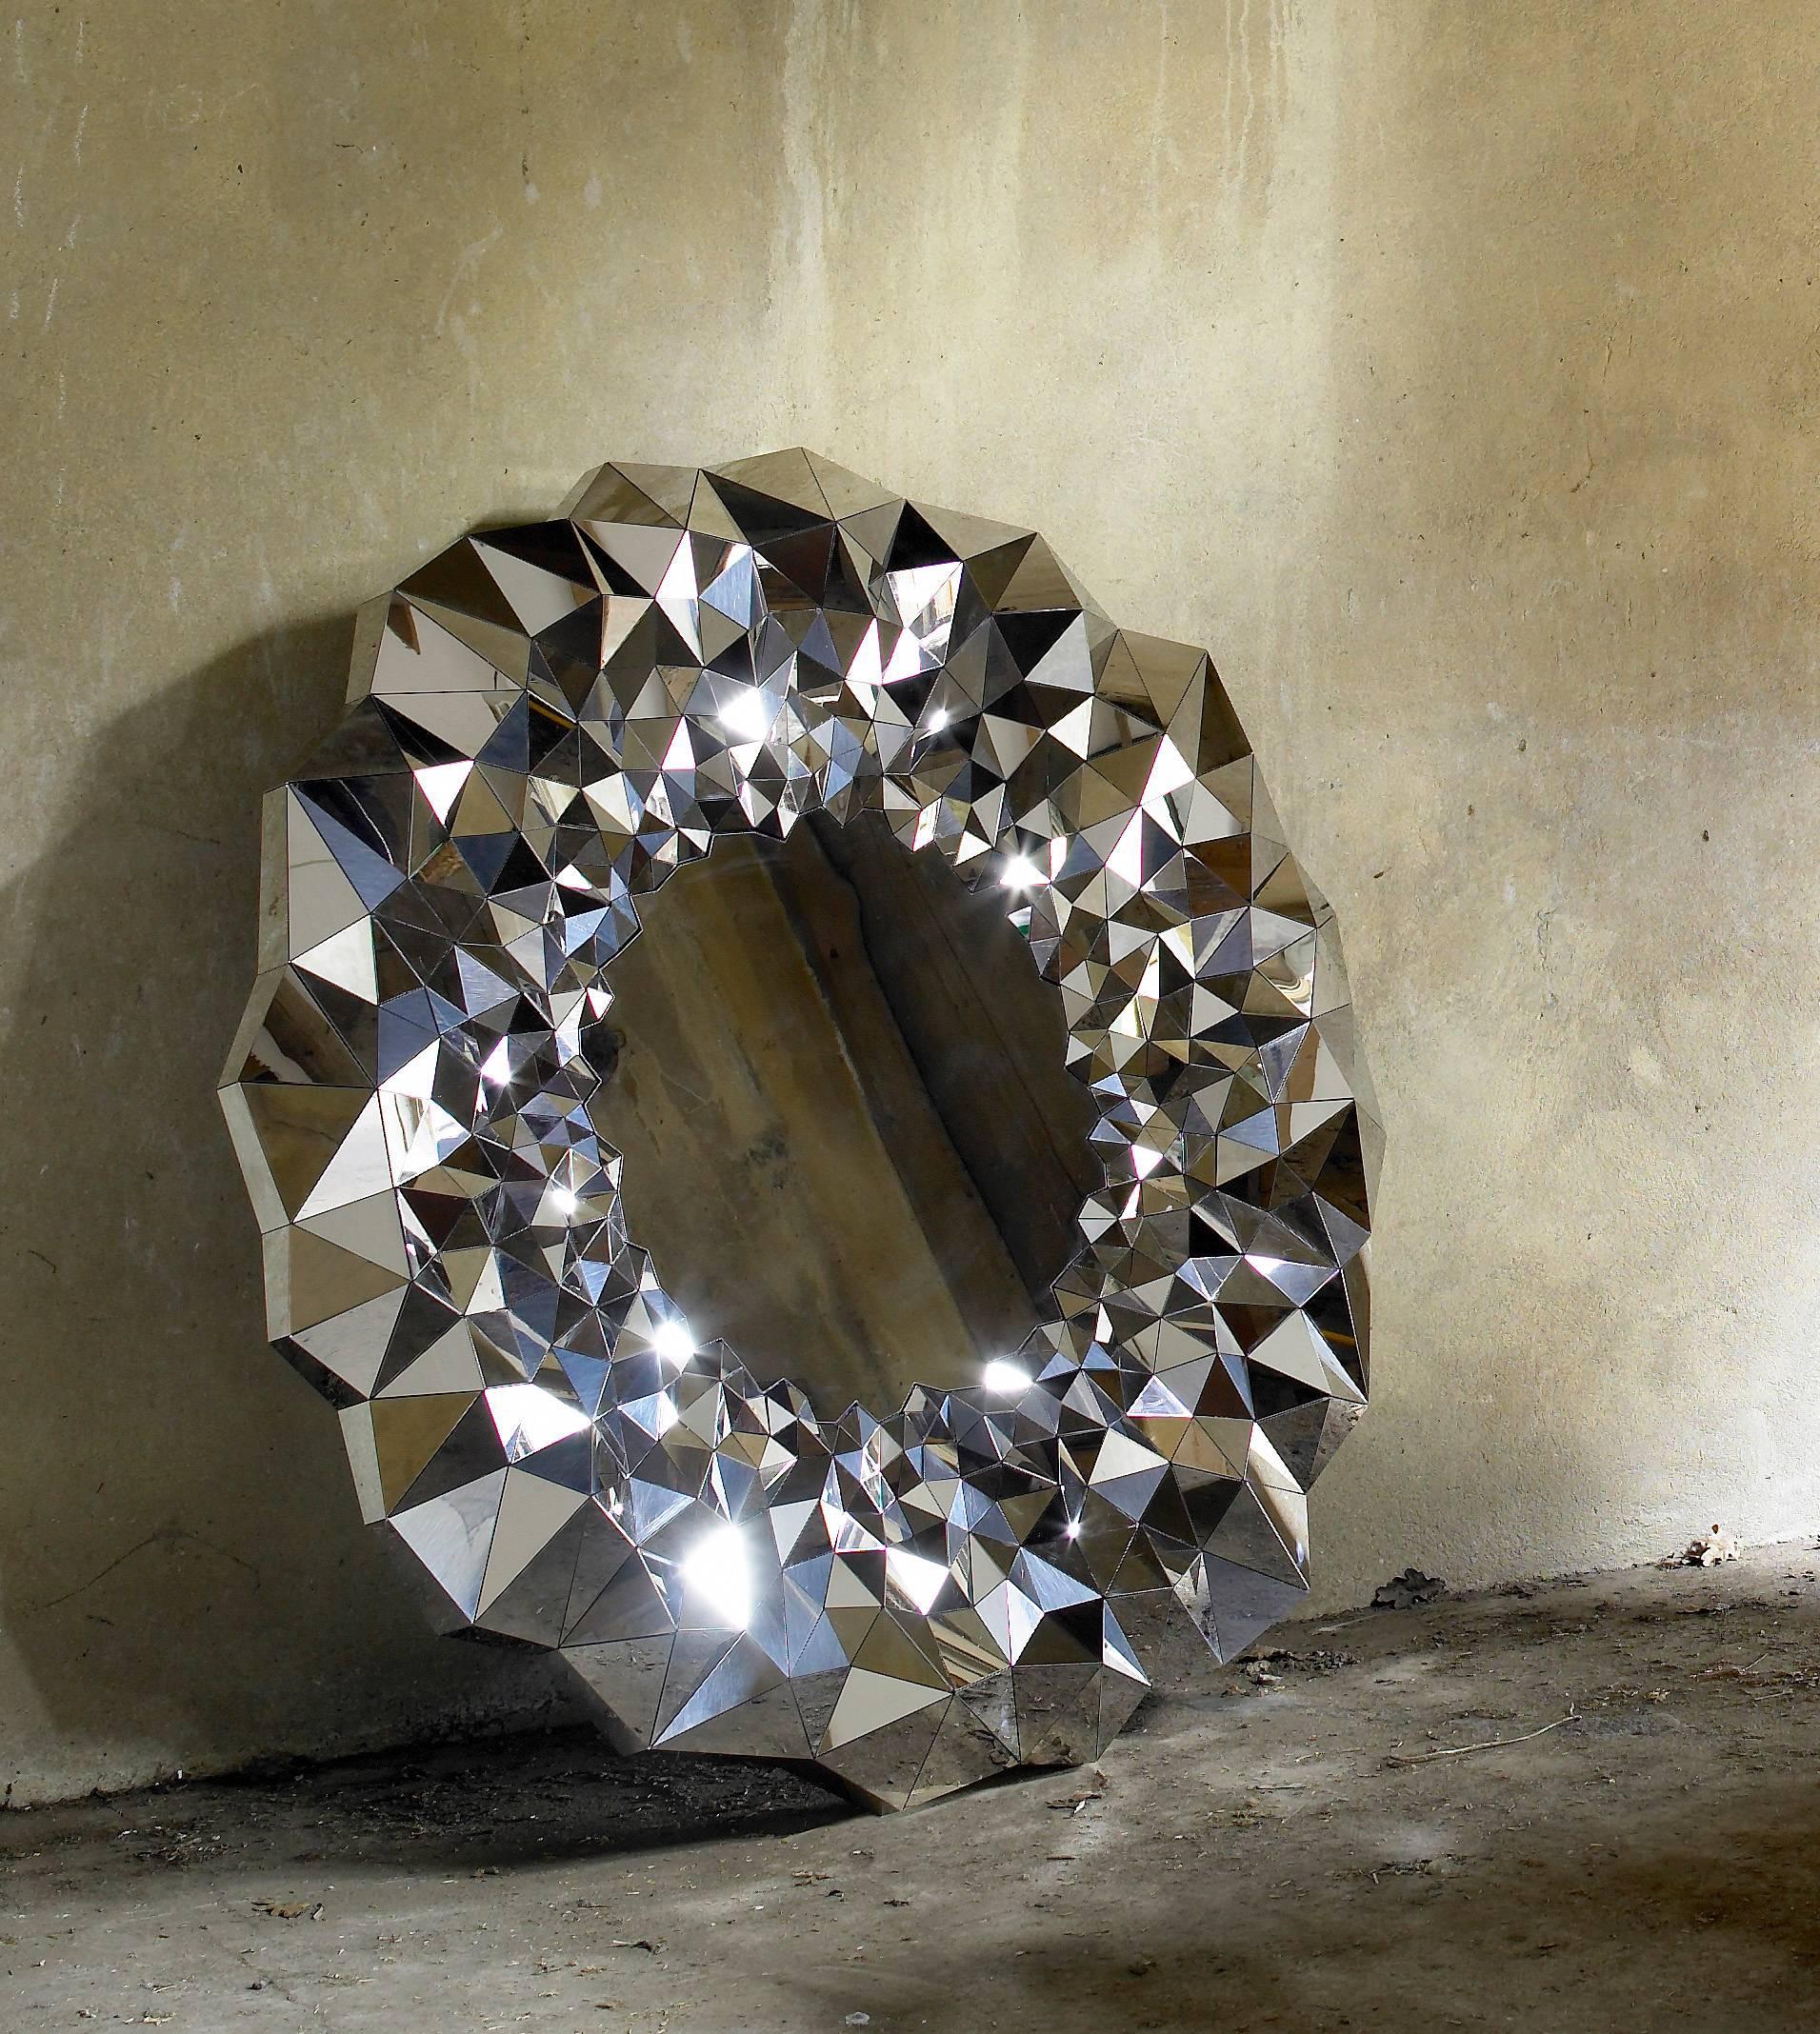 Inspired by the precious qualities of naturally forming amethyst geodes and machine cut diamonds, Jake Phipp’s Stellar mirror is a unique work of art made of super mirror stainless steel. The large expansive surfaces on the mirror are in stark